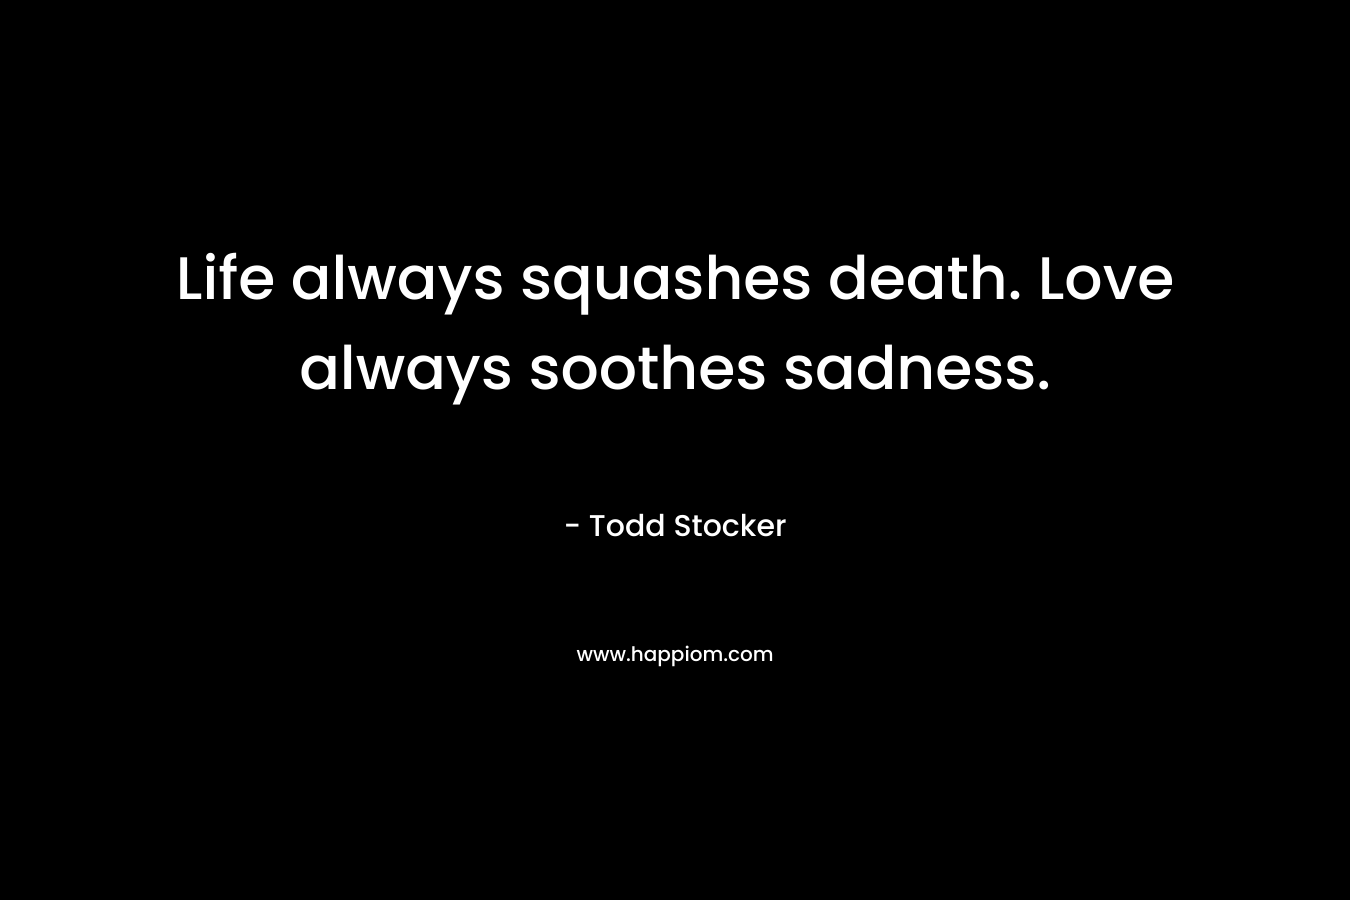 Life always squashes death. Love always soothes sadness. – Todd Stocker